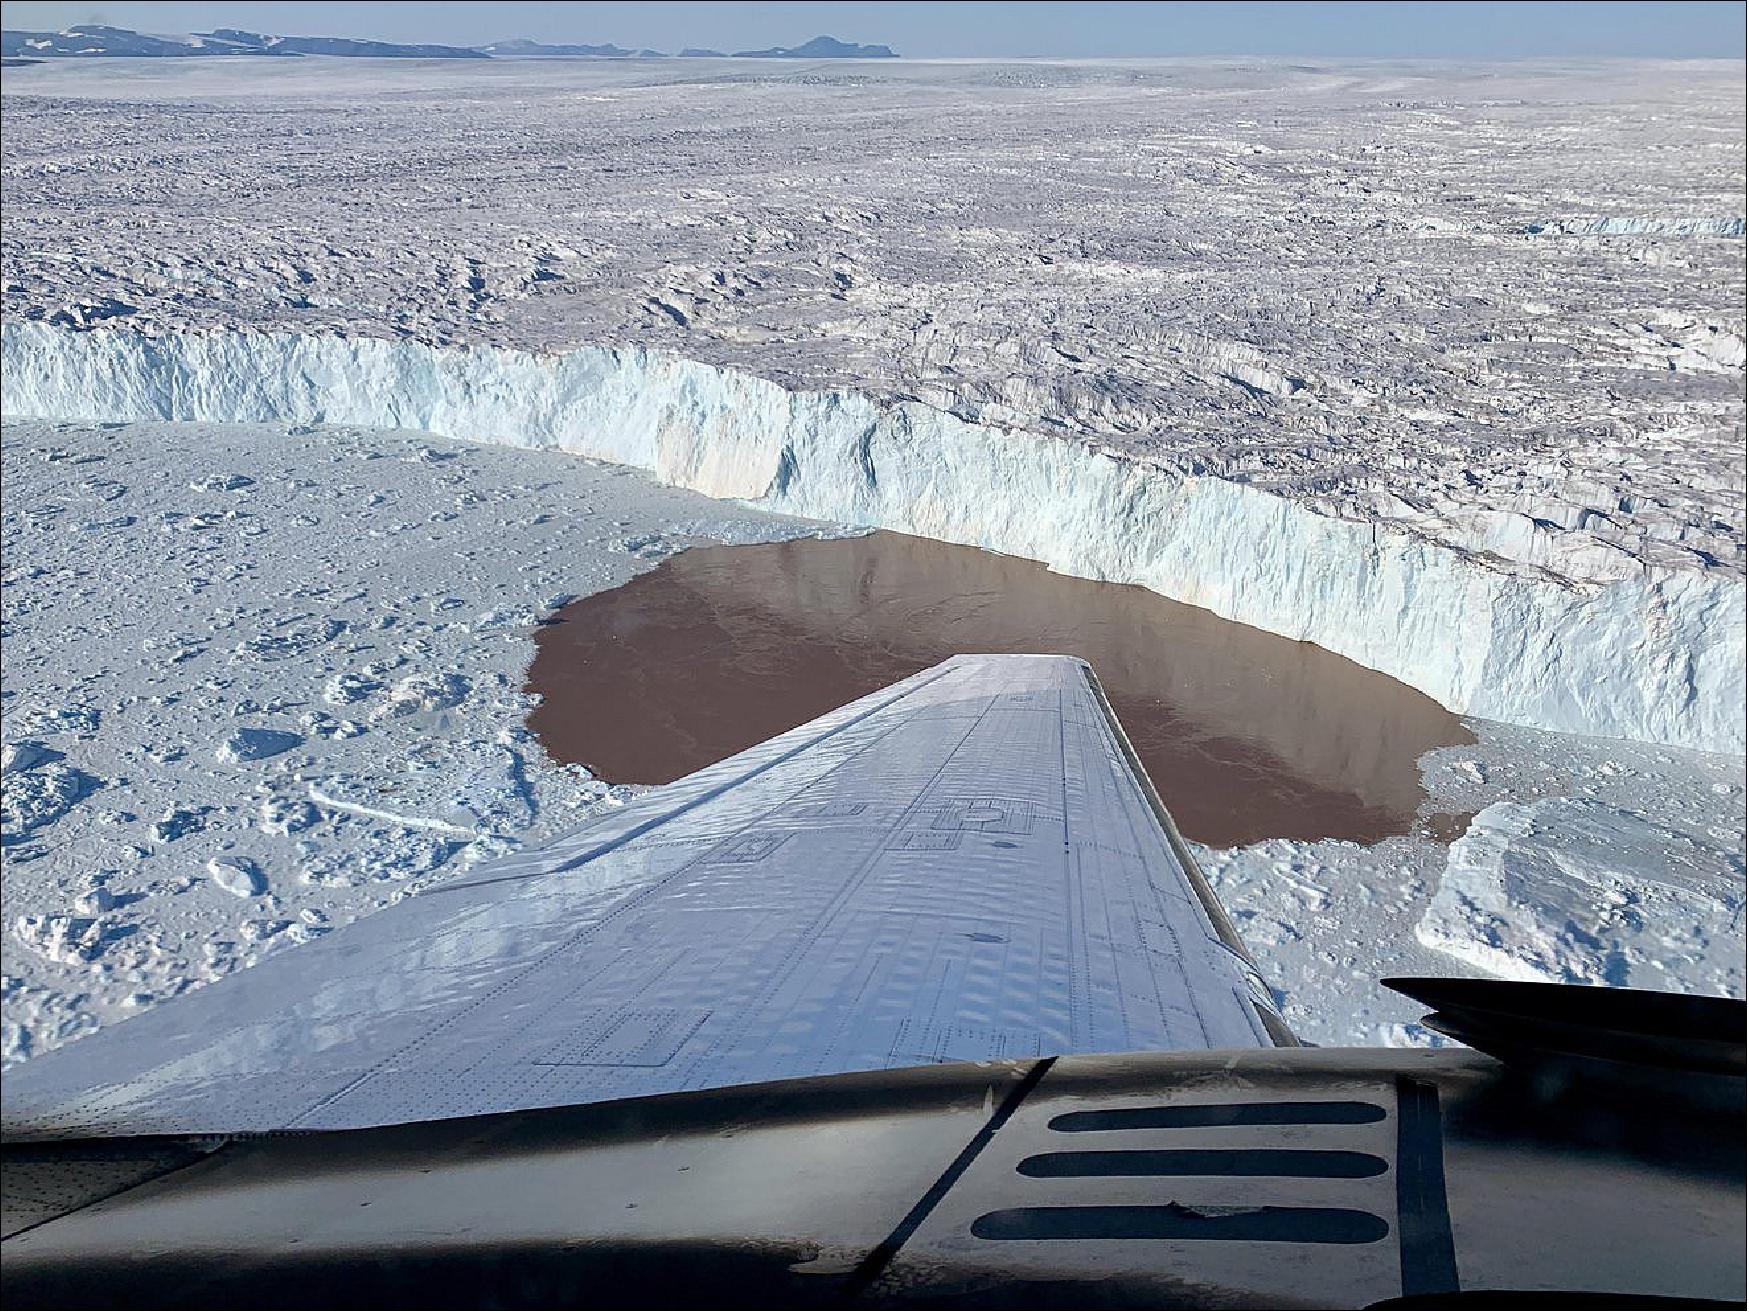 Figure 40: To measure water depth and salinity, the OMG project dropped probes by plane into fjords along Greenland's coast. Shown here is one such fjord in which a glacier is undercut by warming water (image credit: NASA/JPL-Caltech)